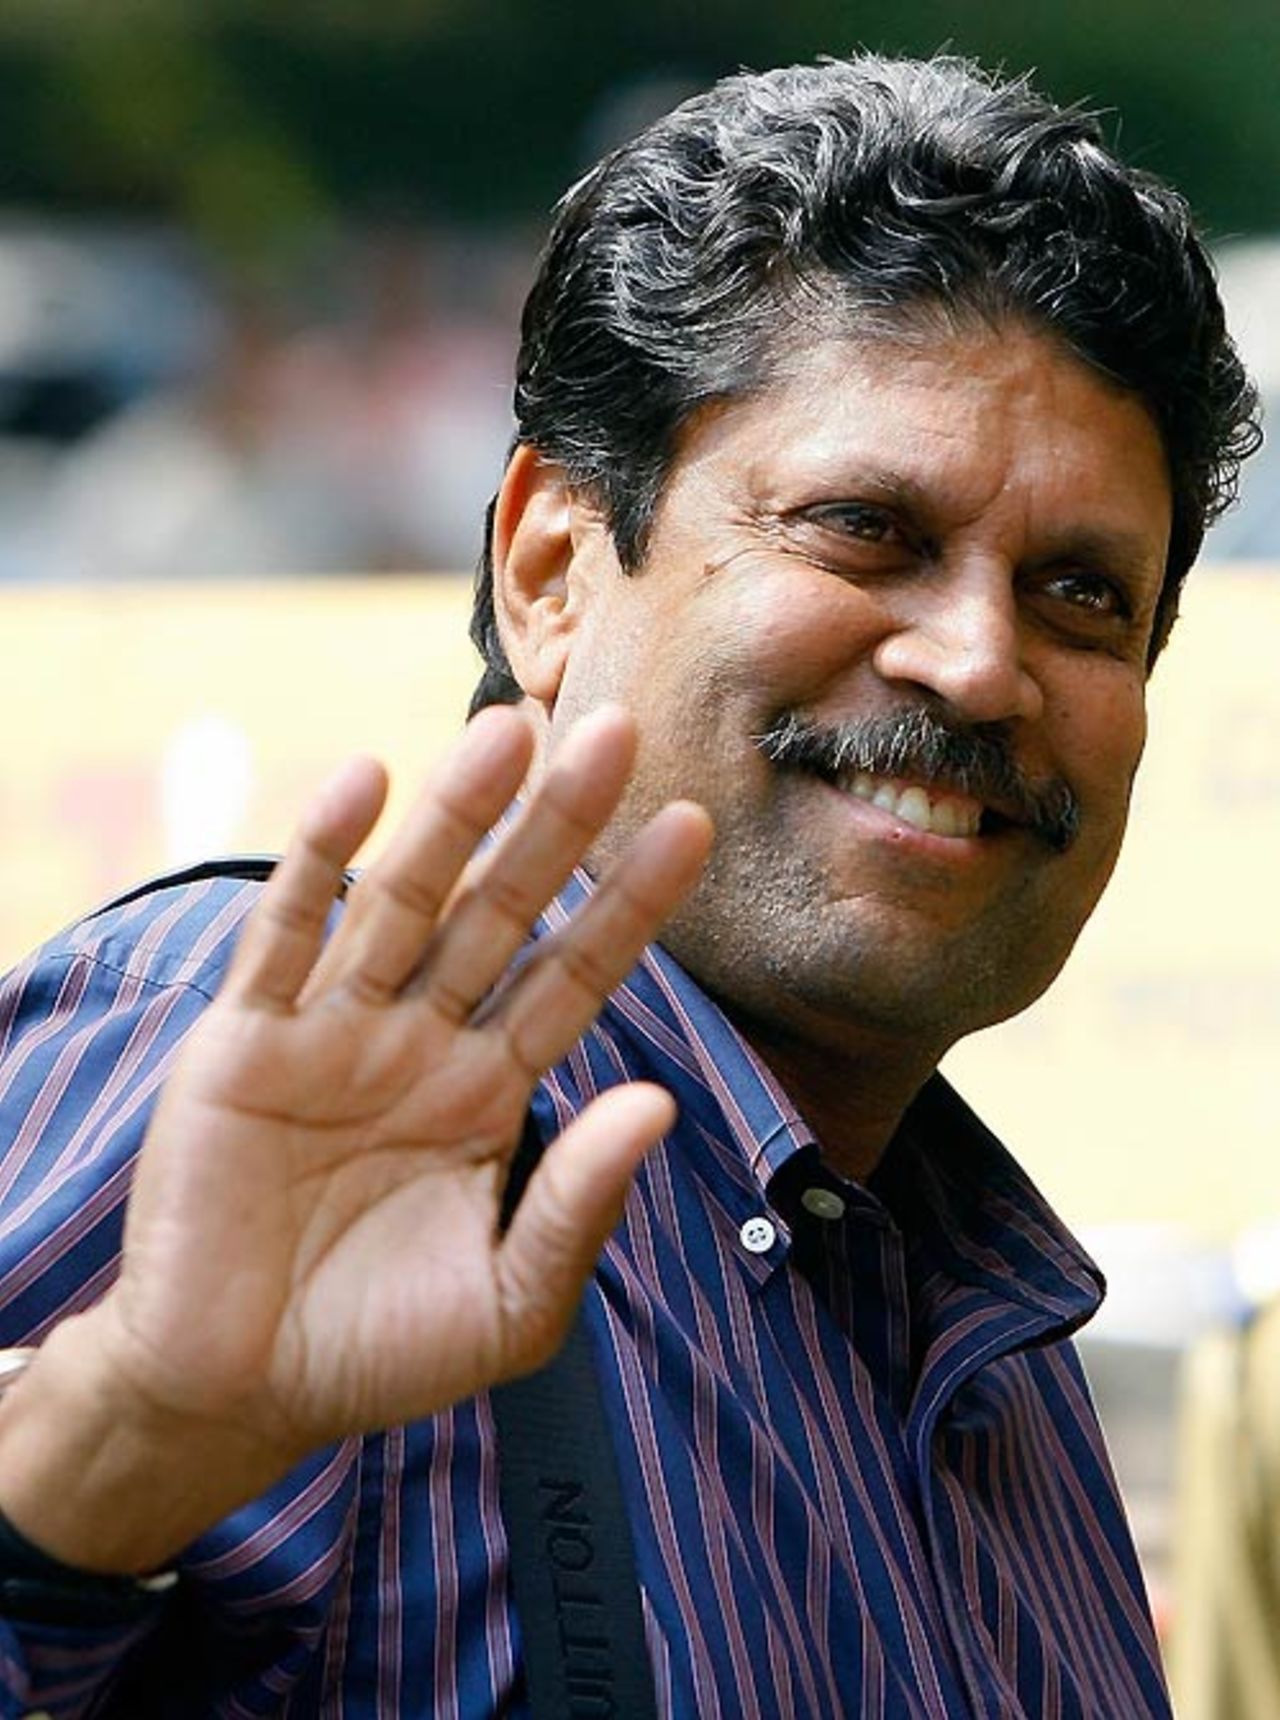 Kapil Dev waves to the media as he arrives for the BCCI meeting at the Wankhede Stadium, Mumbai, April 6, 2007